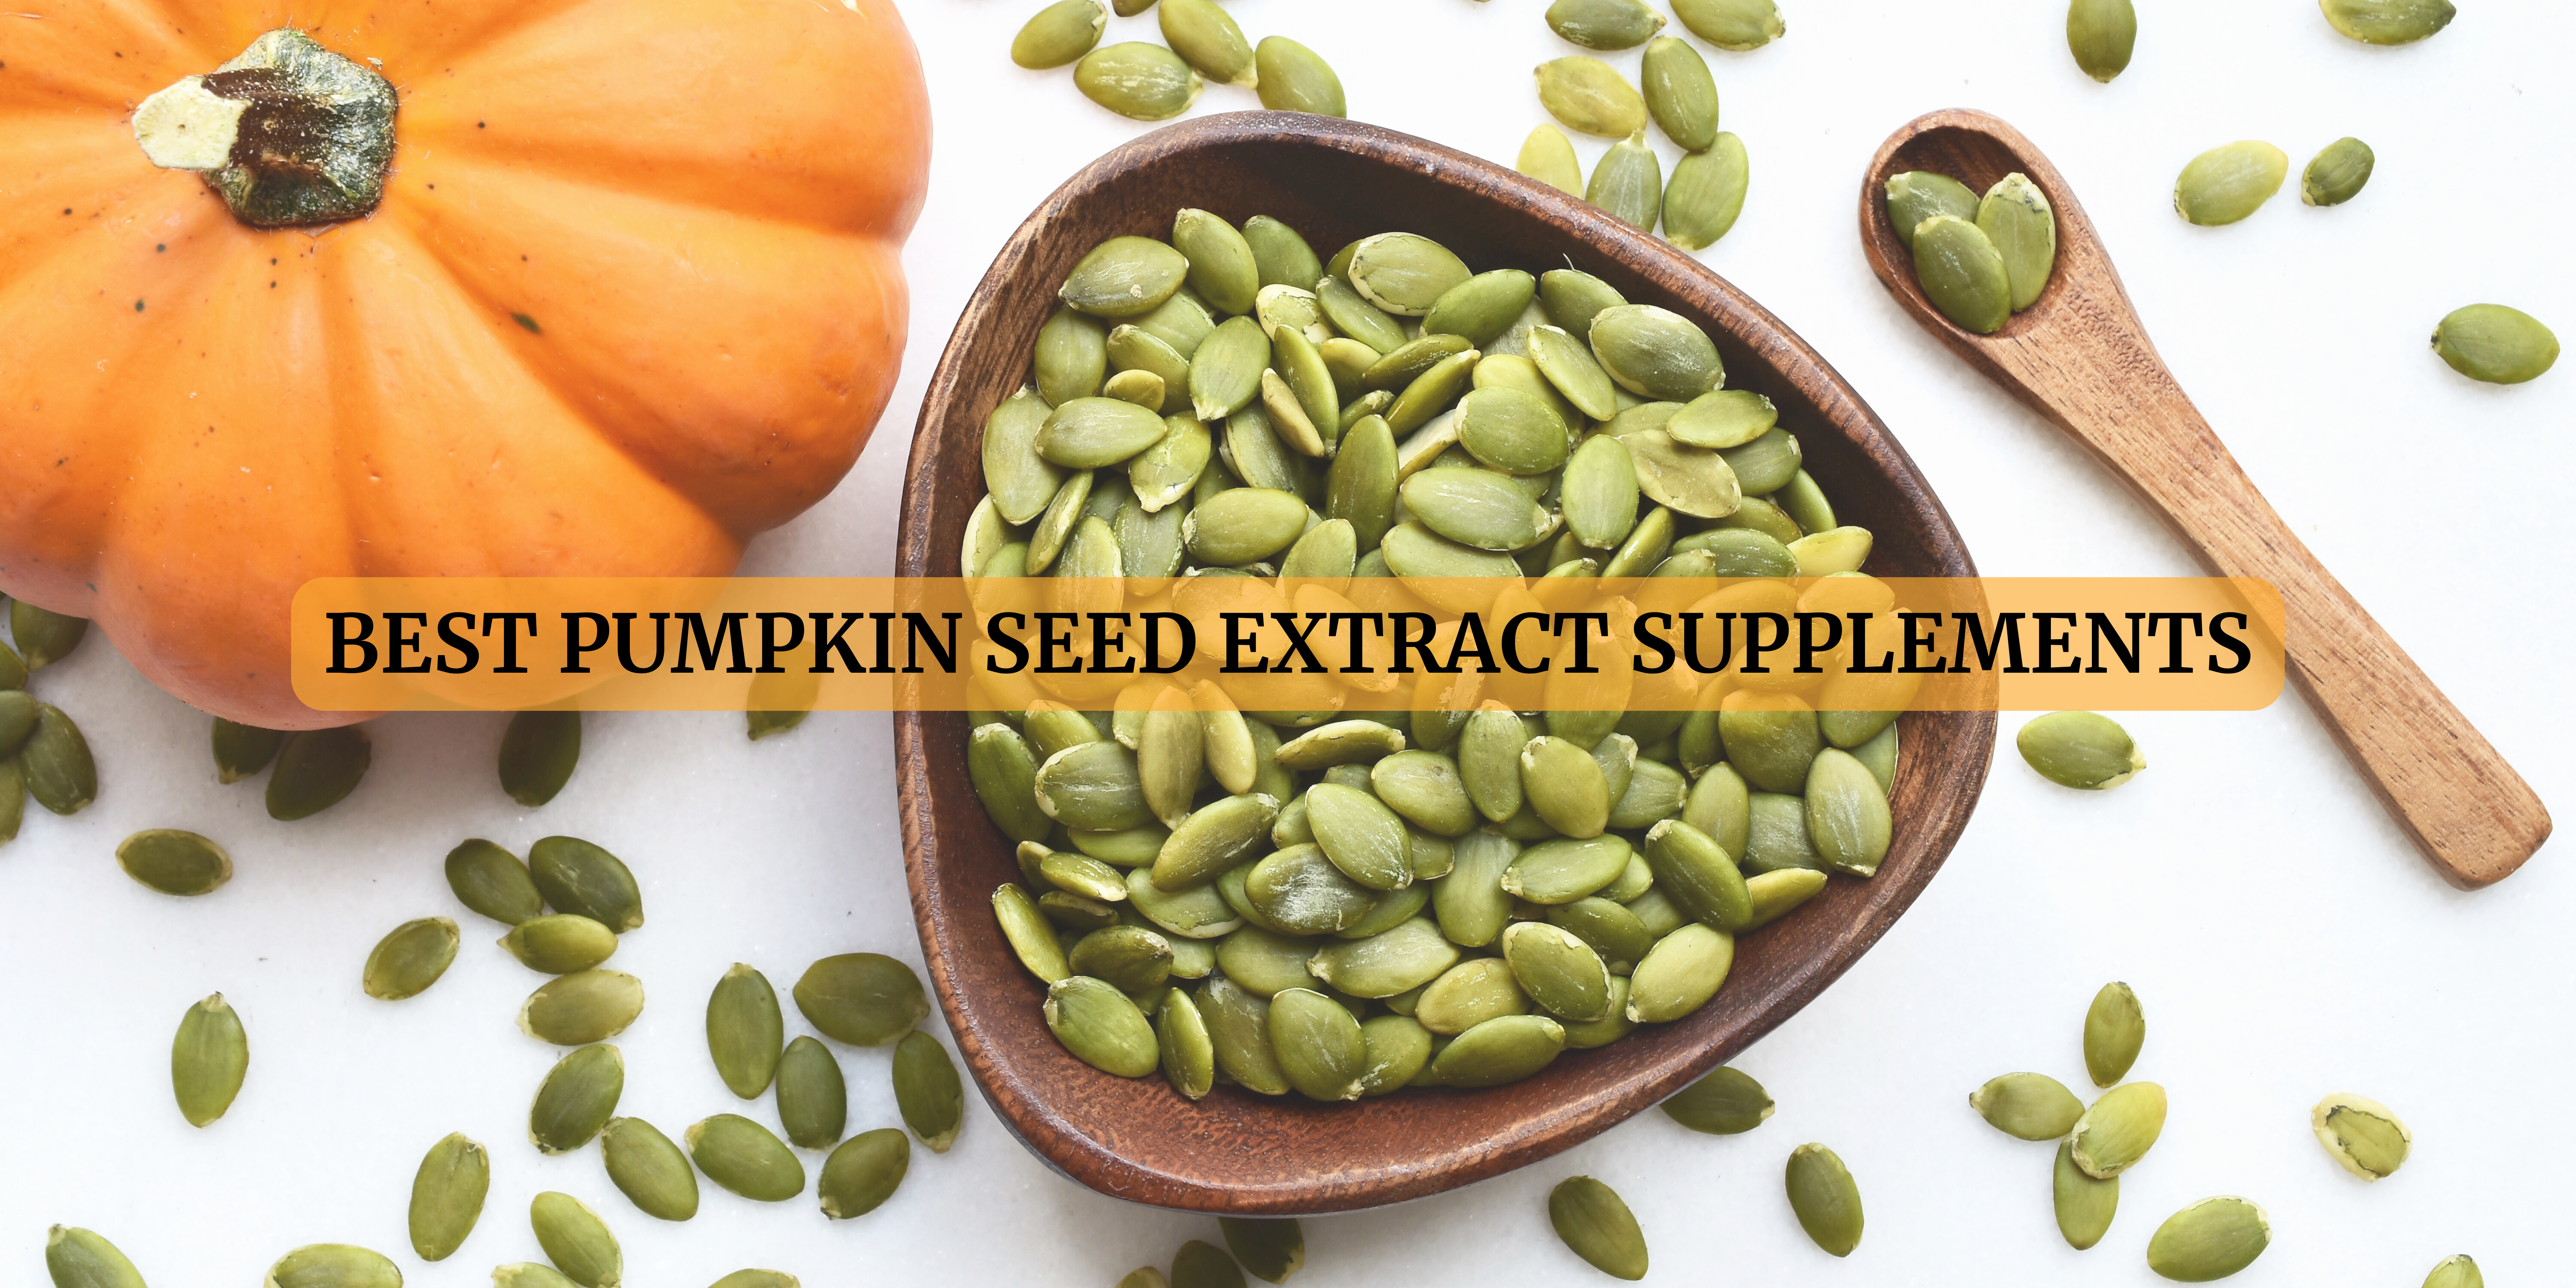 pumpkin seed extract supplements in Japan